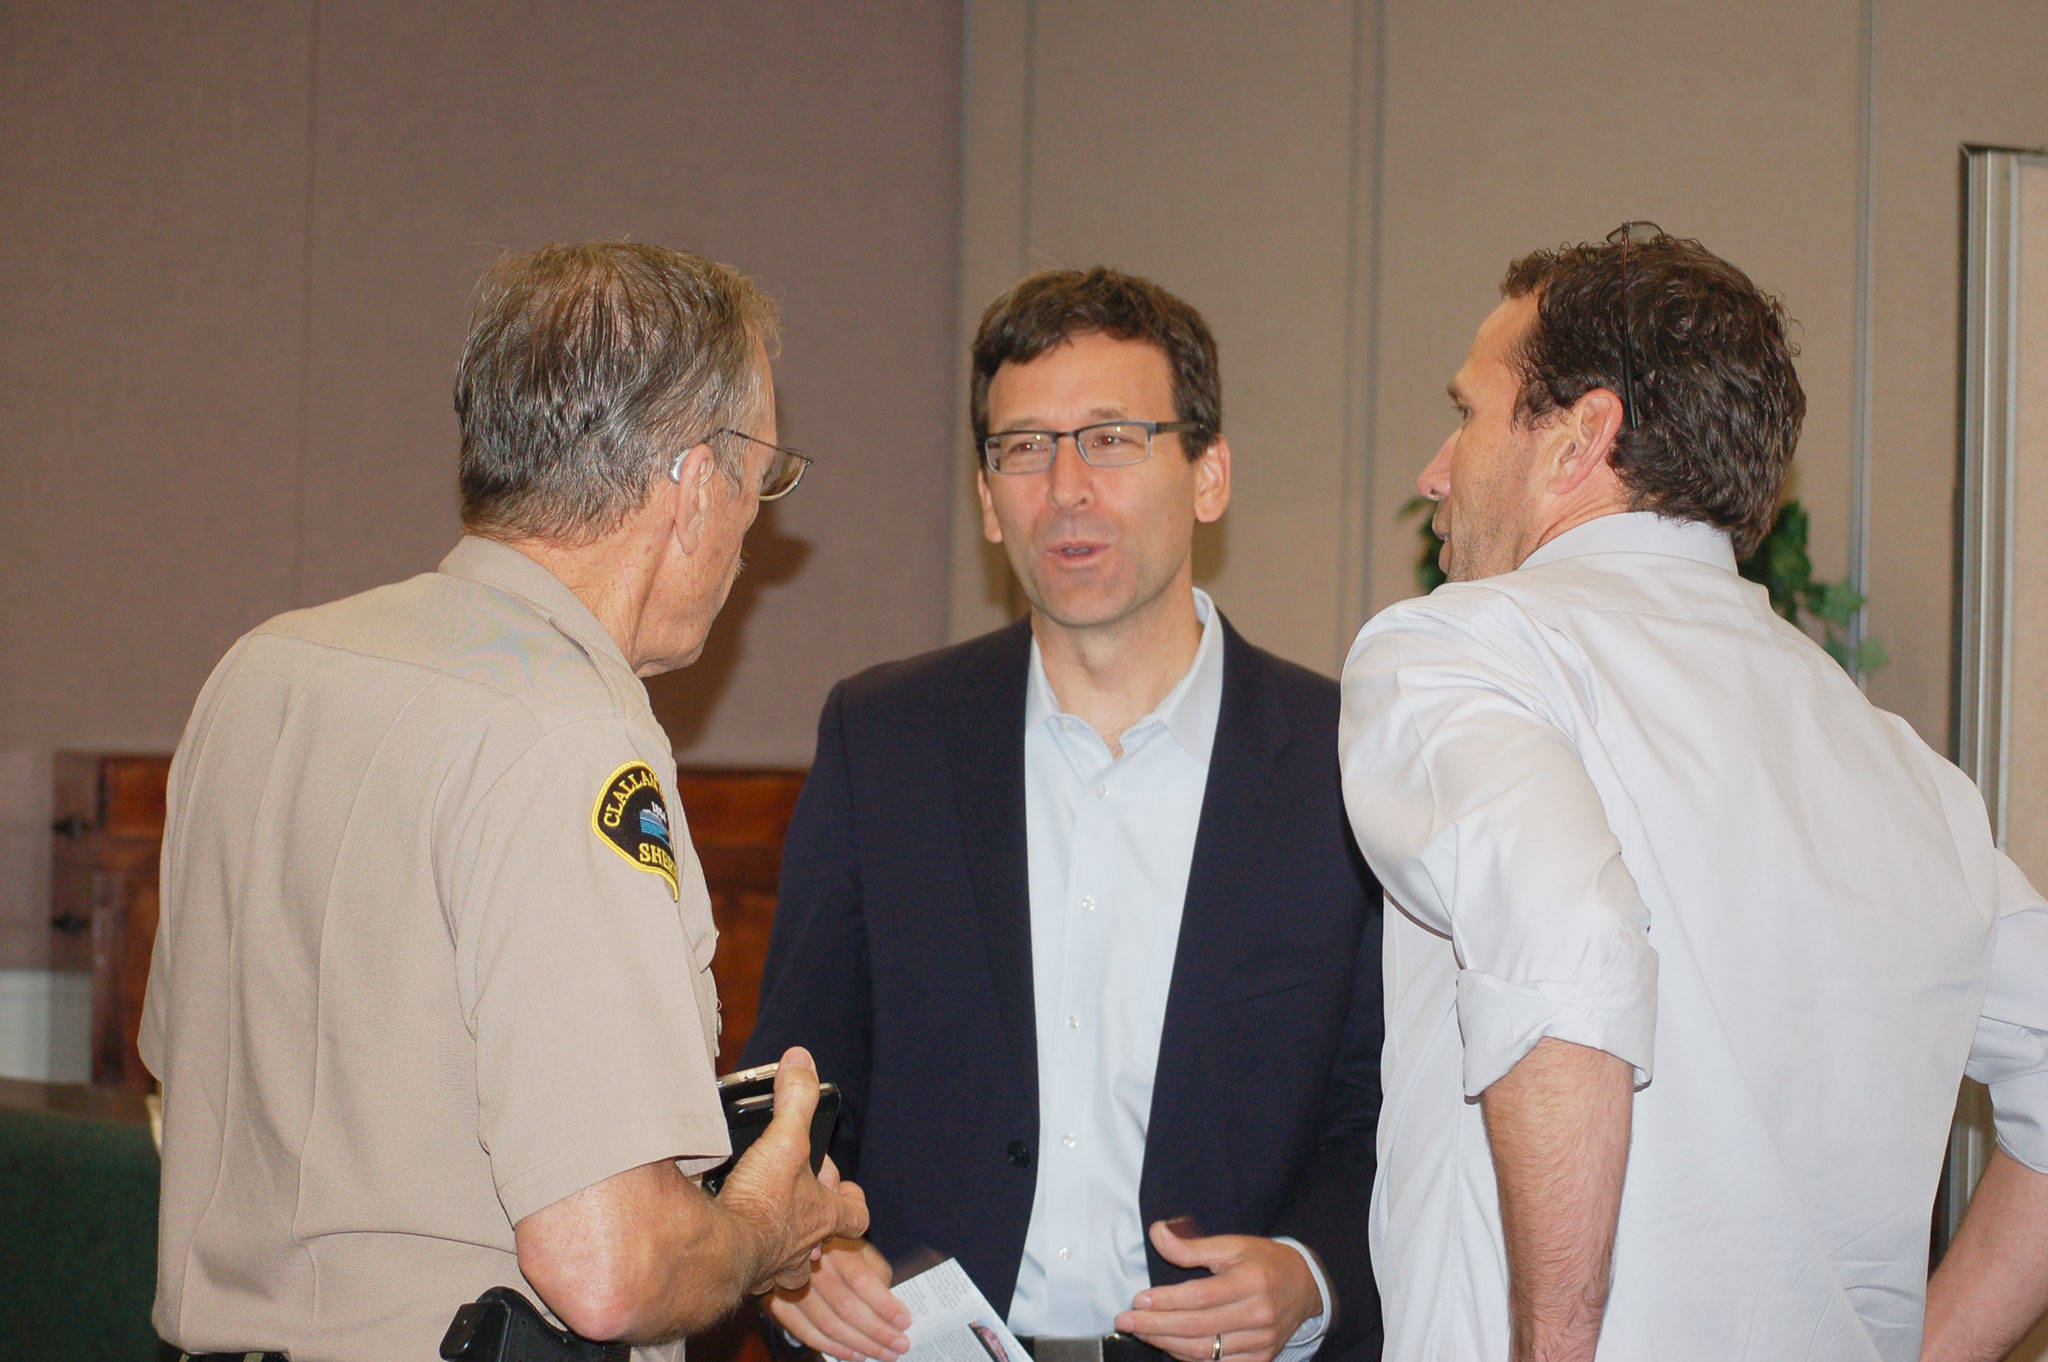 Washington State Attorney General Bob Ferguson, center, talks with Clallam County Sheriff Bill Benedict, left, and Rotary members after the Sequim Sunrise Rotary meeting last Friday, where he stopped to pay a visit on his way to the ceremony naming the Daniel J. Evans Wilderness at Hurricane Ridge. (Erin Hawkins/Olympic Peninsula News Group)